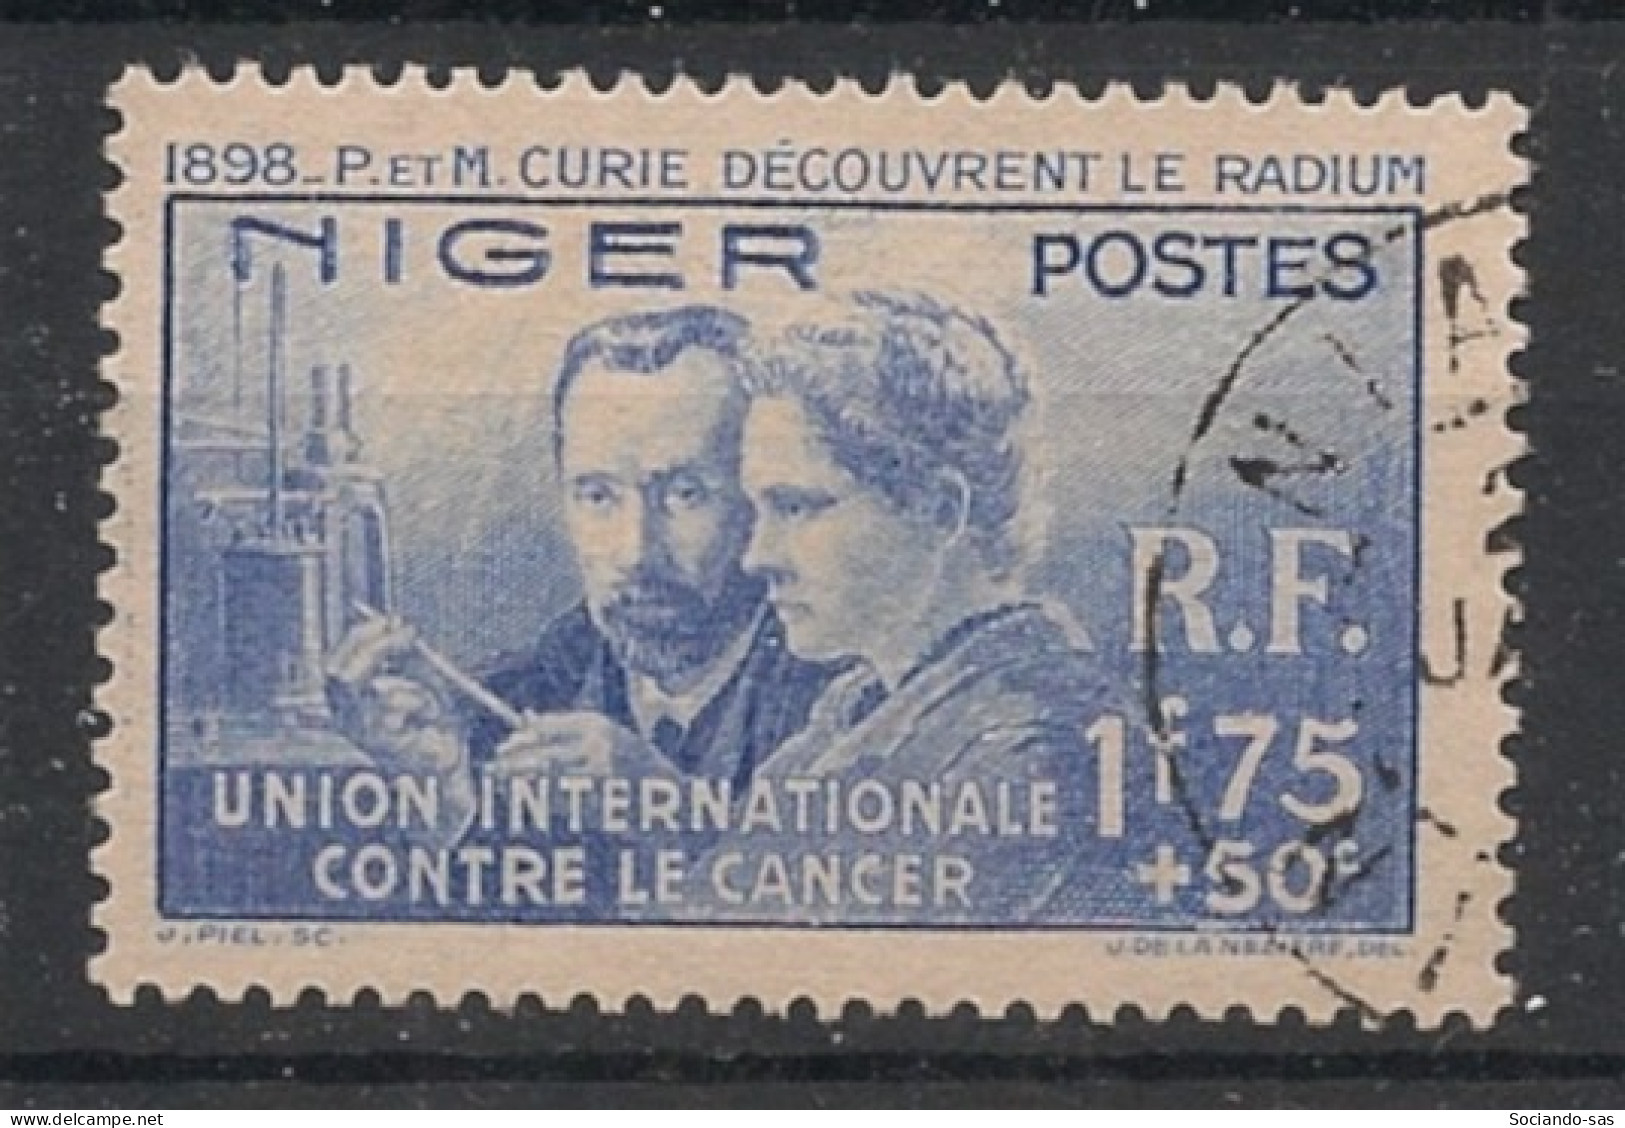 NIGER - 1938 - N°YT. 63 - Marie Curie - Oblitéré / Used - Used Stamps